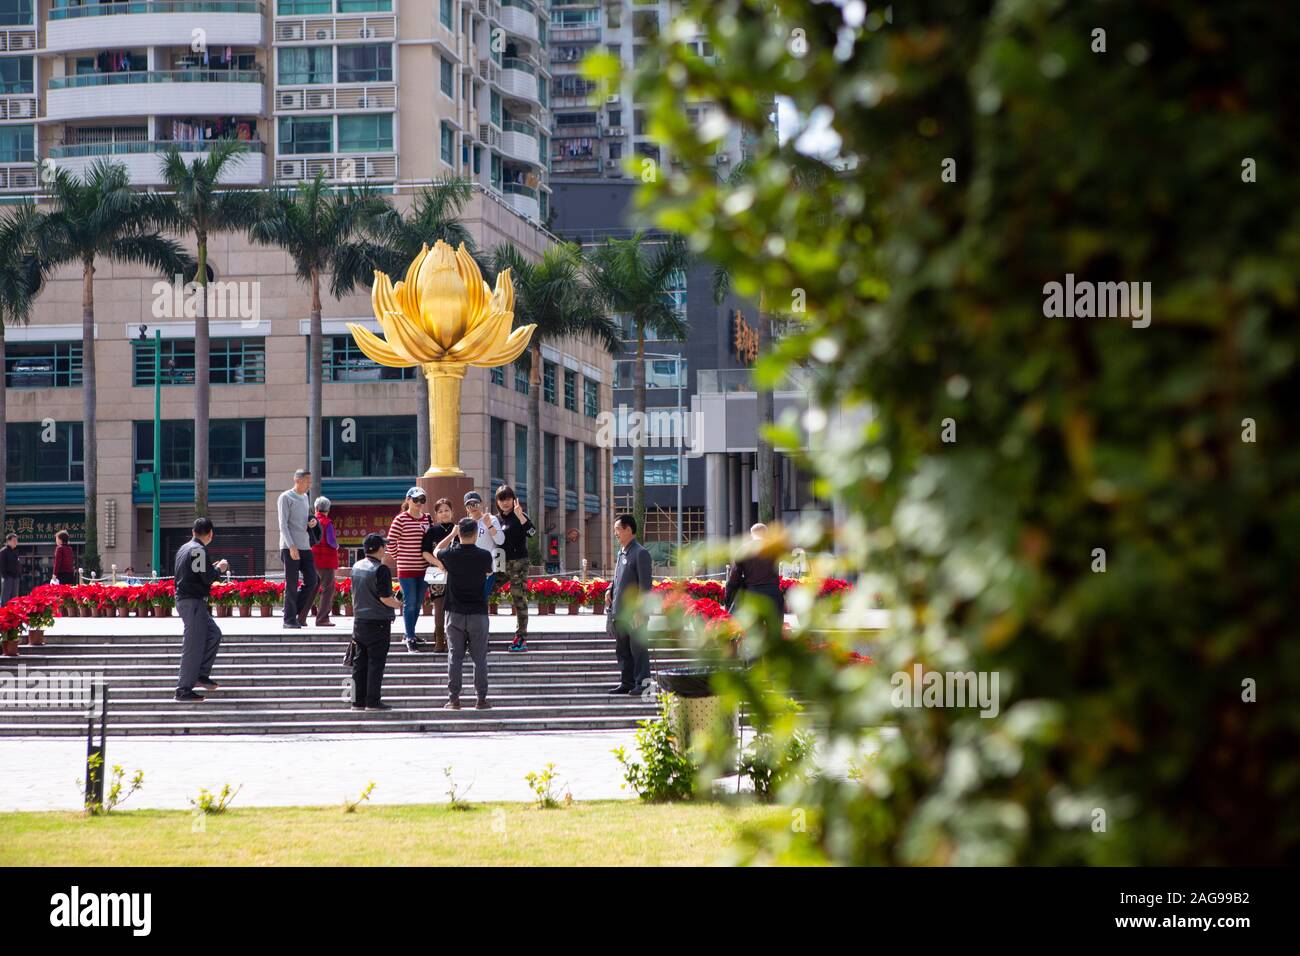 Macao, China. 18th Dec, 2019. People pose for photos at the Golden Lotus Square in Macao, south China, Dec. 18, 2019. Over the past two decades, the special administrative region has made great strides in economic development and achieved prosperity and stability under the 'one country, two systems' principle. Credit: Li Jing/Xinhua/Alamy Live News Stock Photo